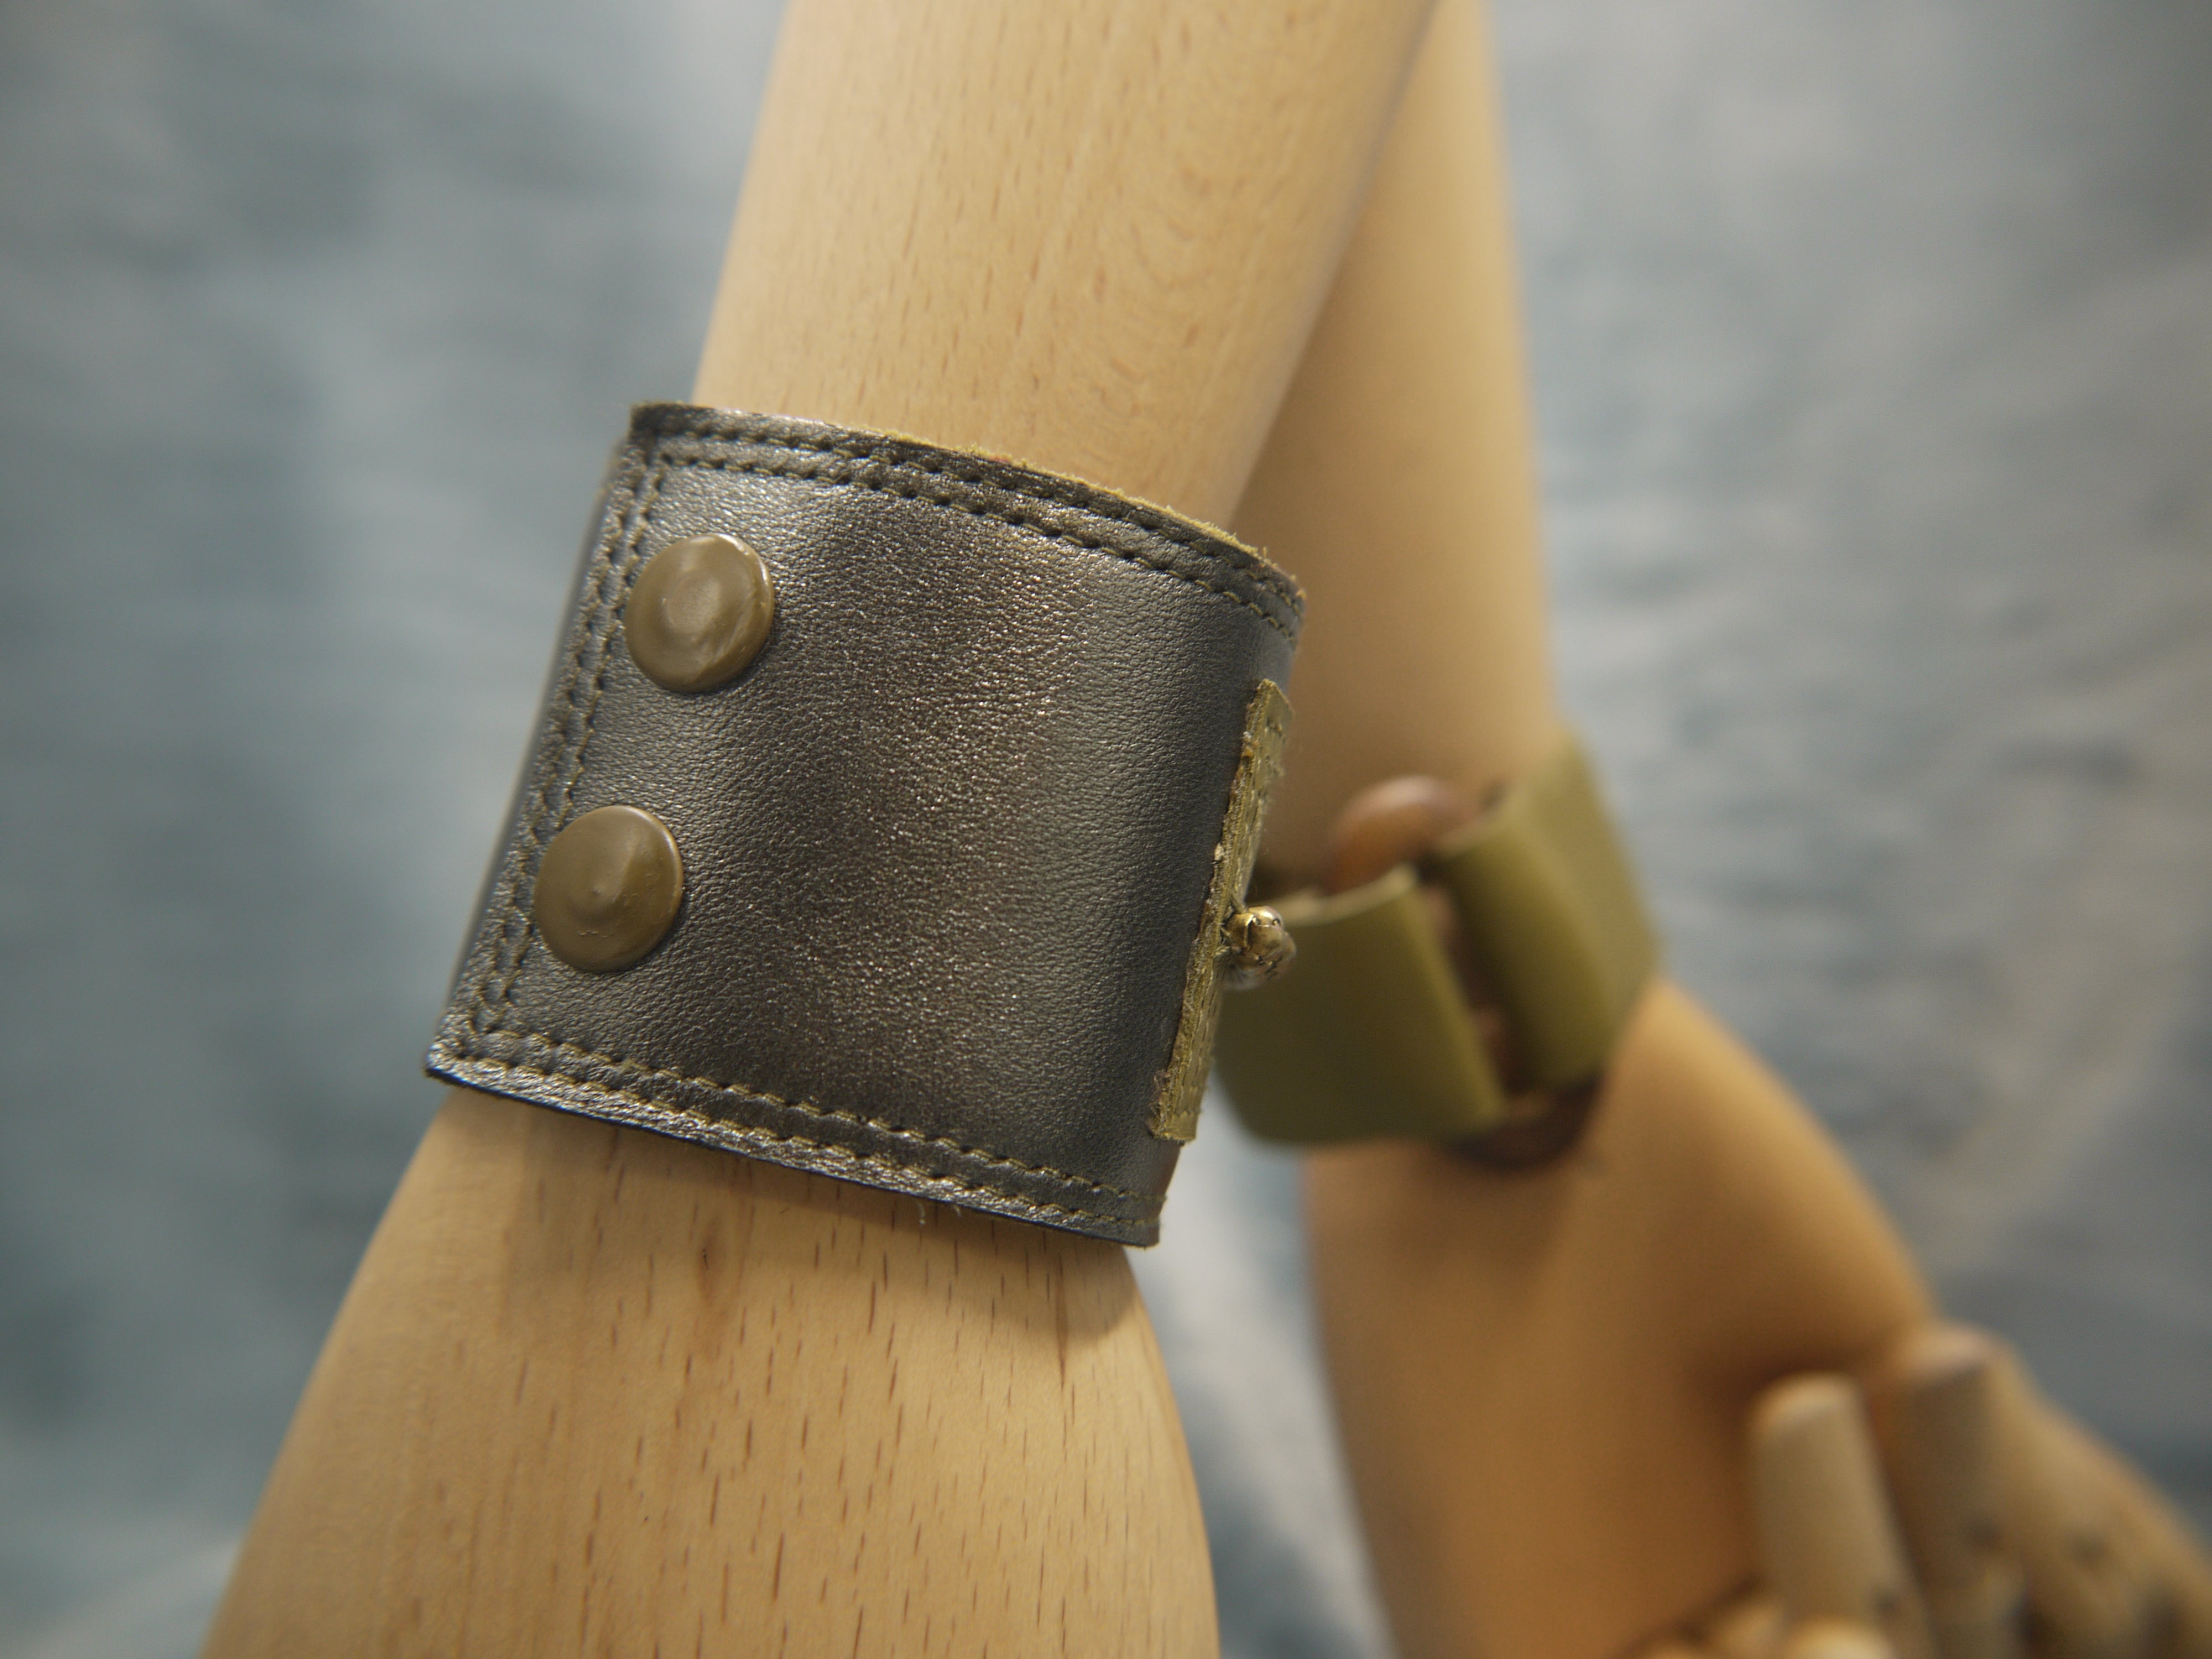 Leather cuff in Gunmetal metallic leather and moss green leather central rectangle which has repeat stich detail which frames the rectangle. A central brass chain is the focal point of the cuff, sewn central across the moss green rectangle. Moss Green/Oval wood cuff seen in the background